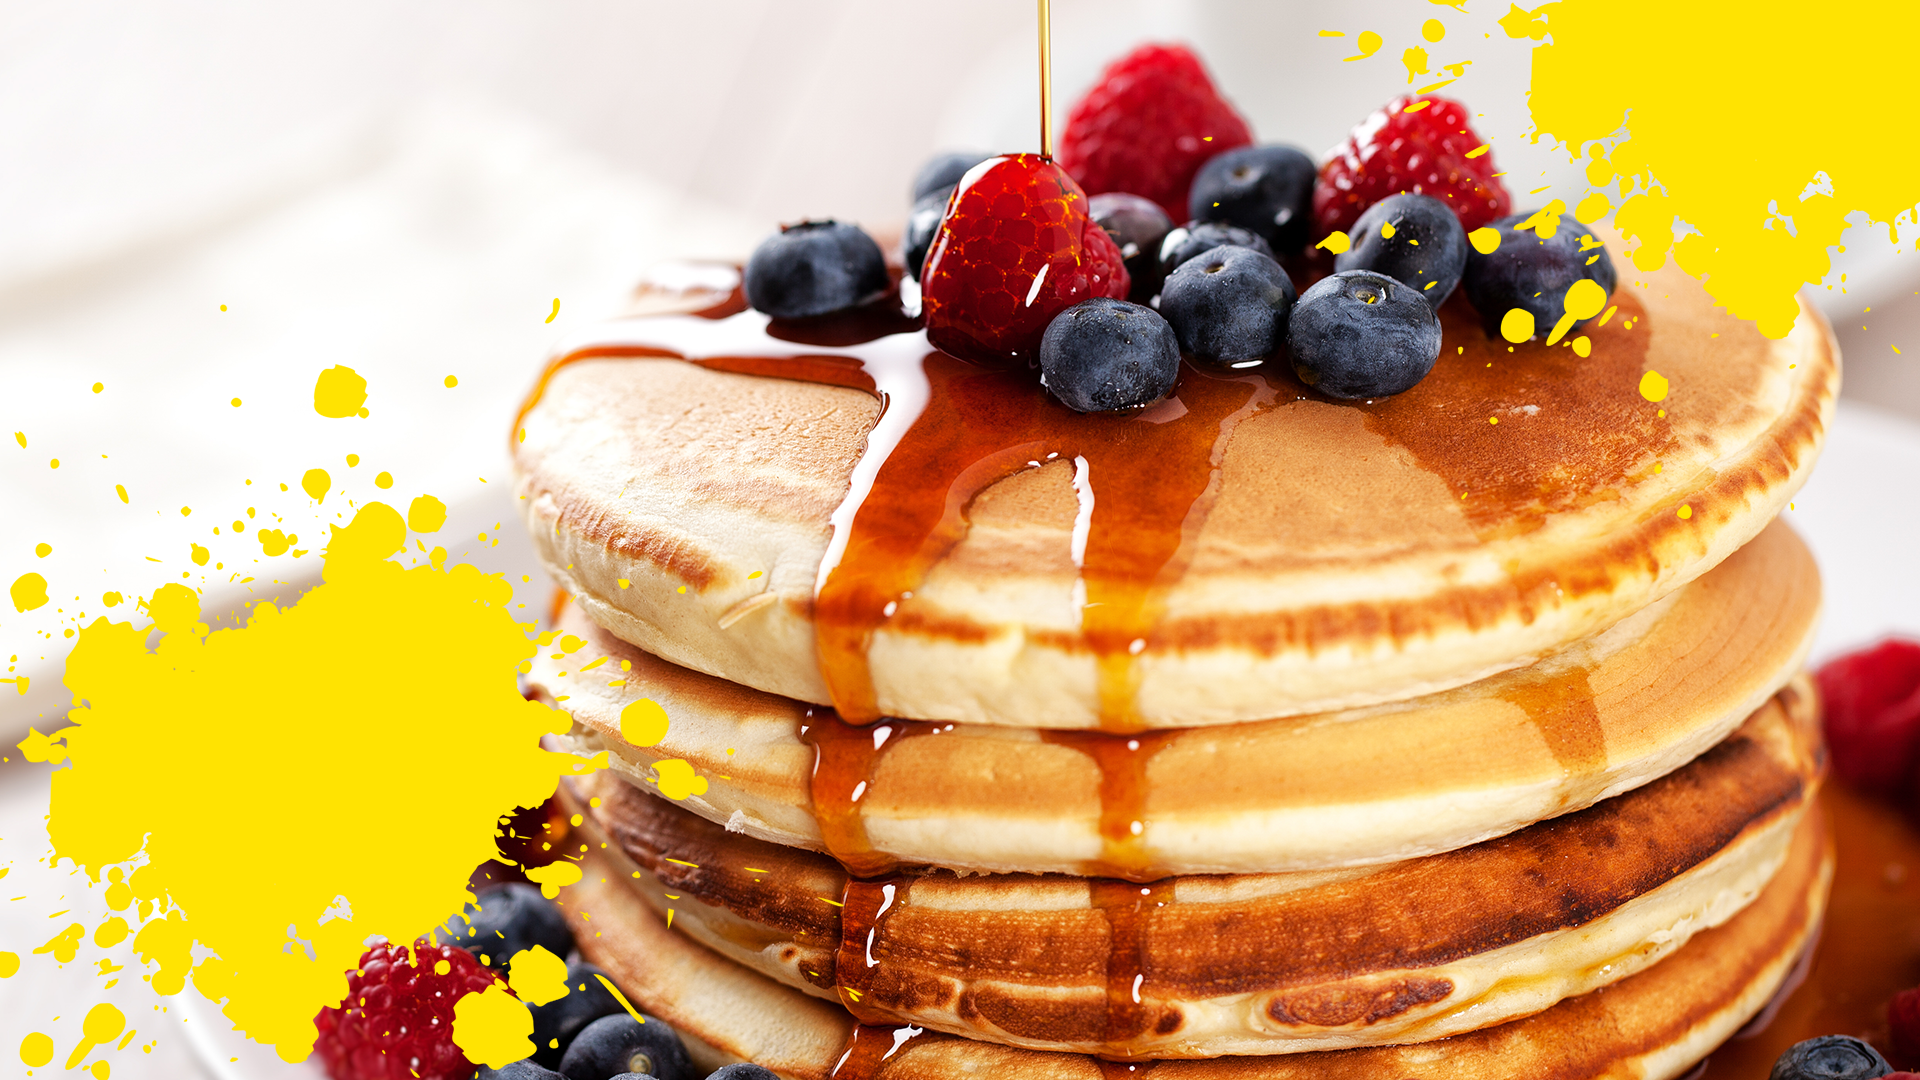 Pancakes and berries with yellow splats